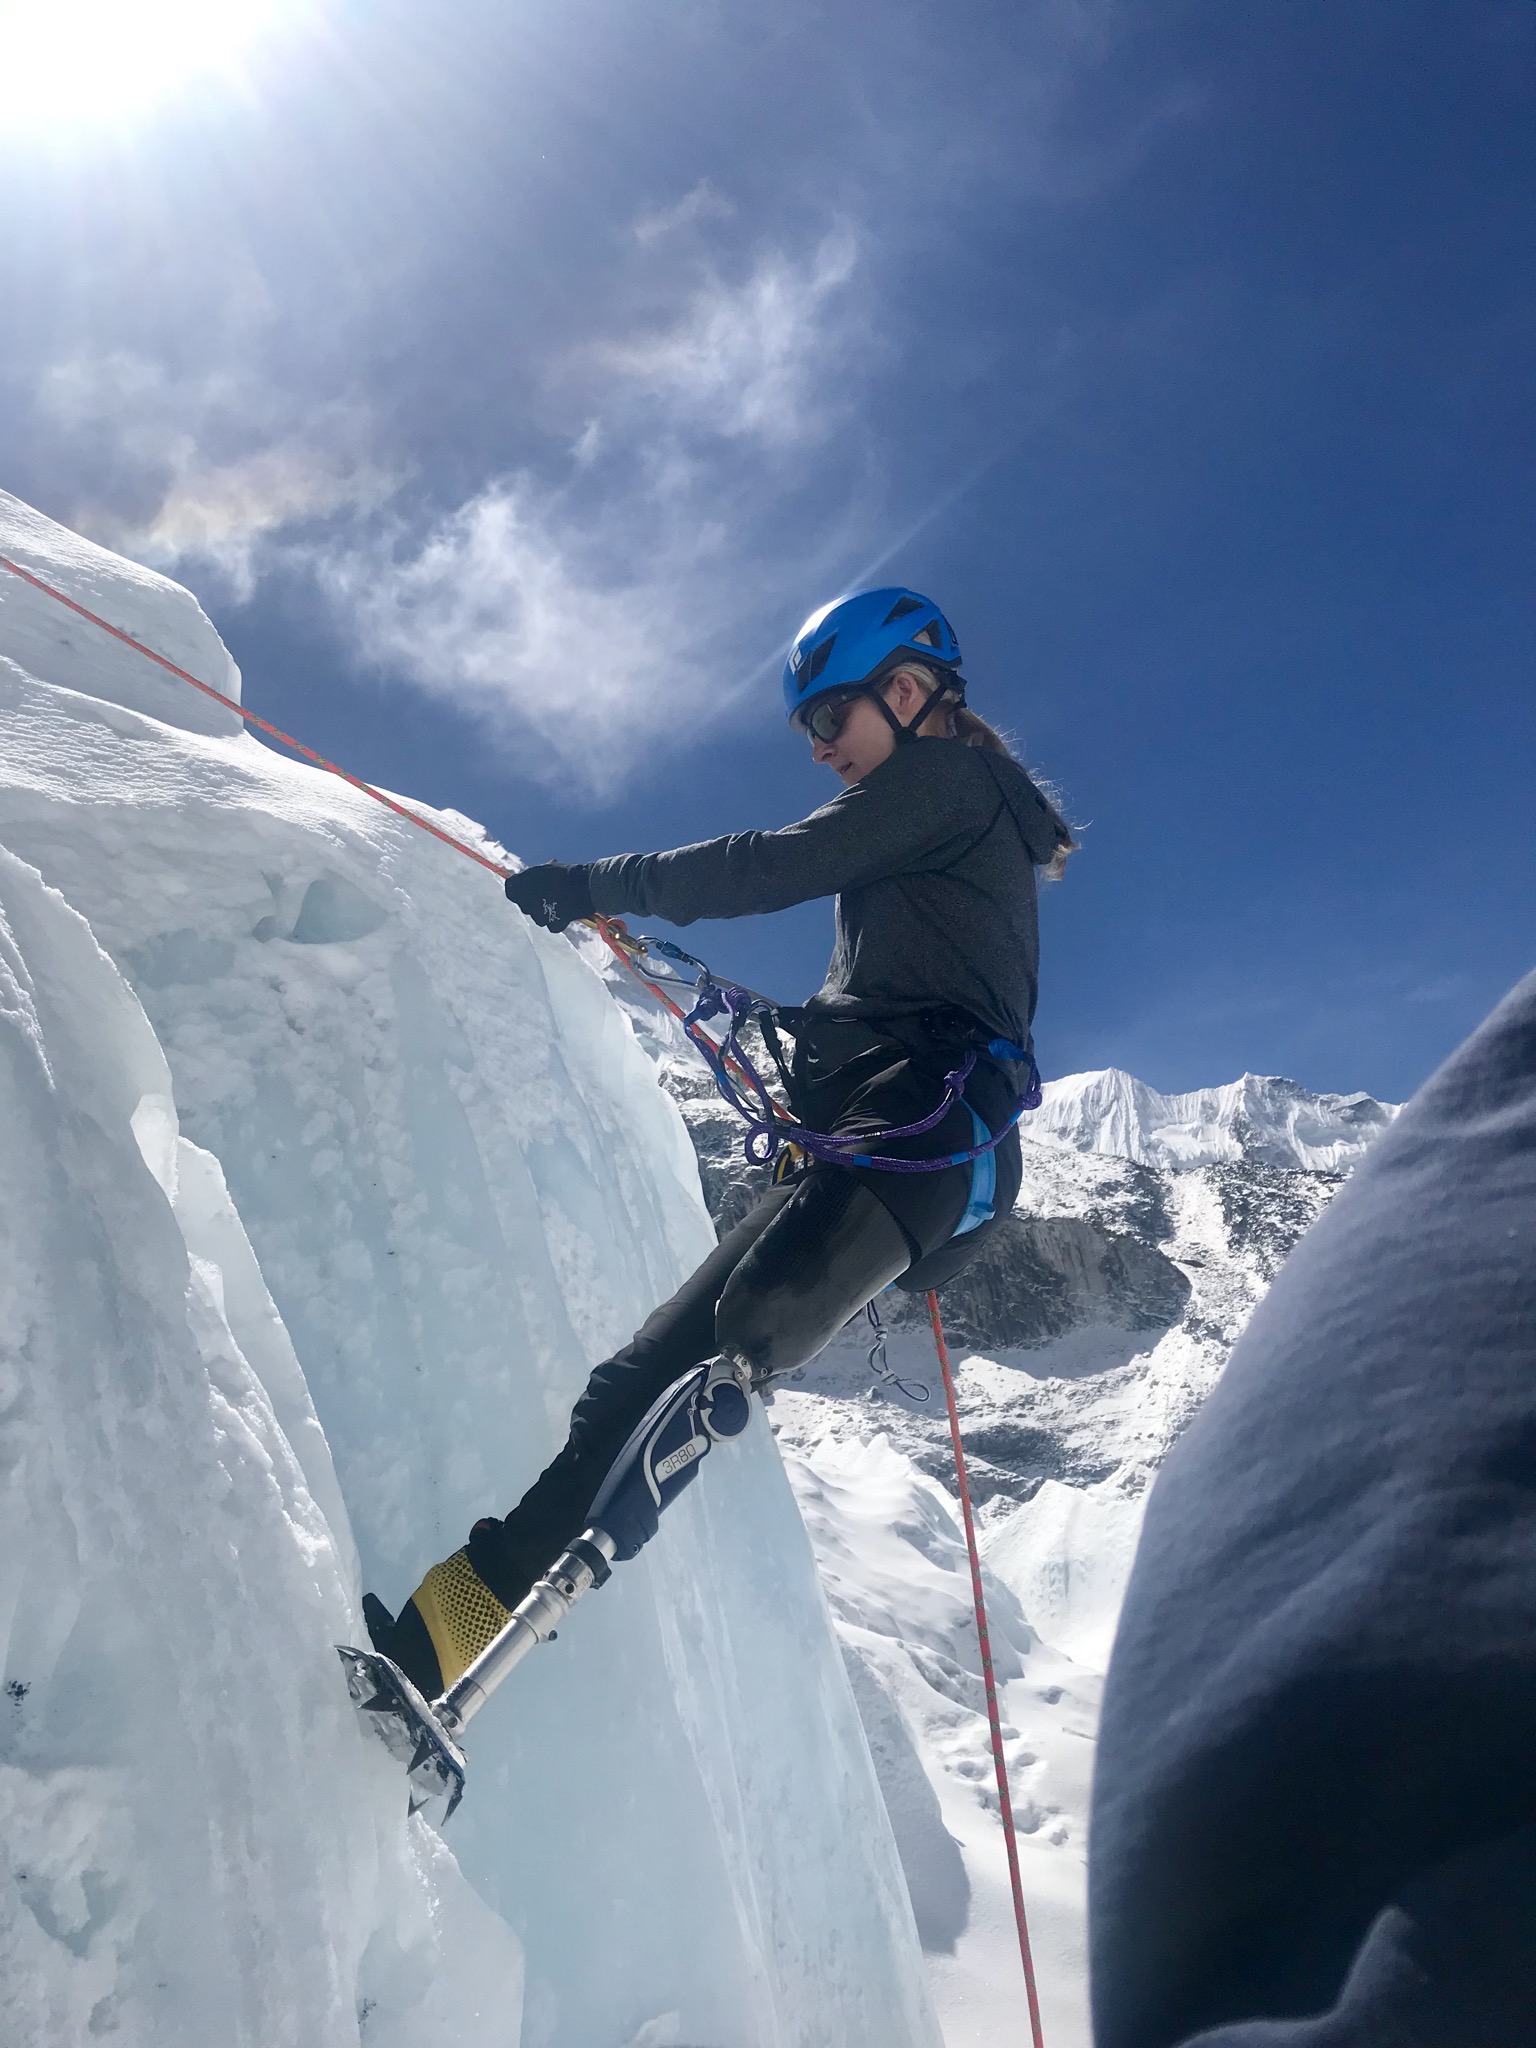 Athlete with left leg below the knee prosthetic climbing on a snow covered mountain